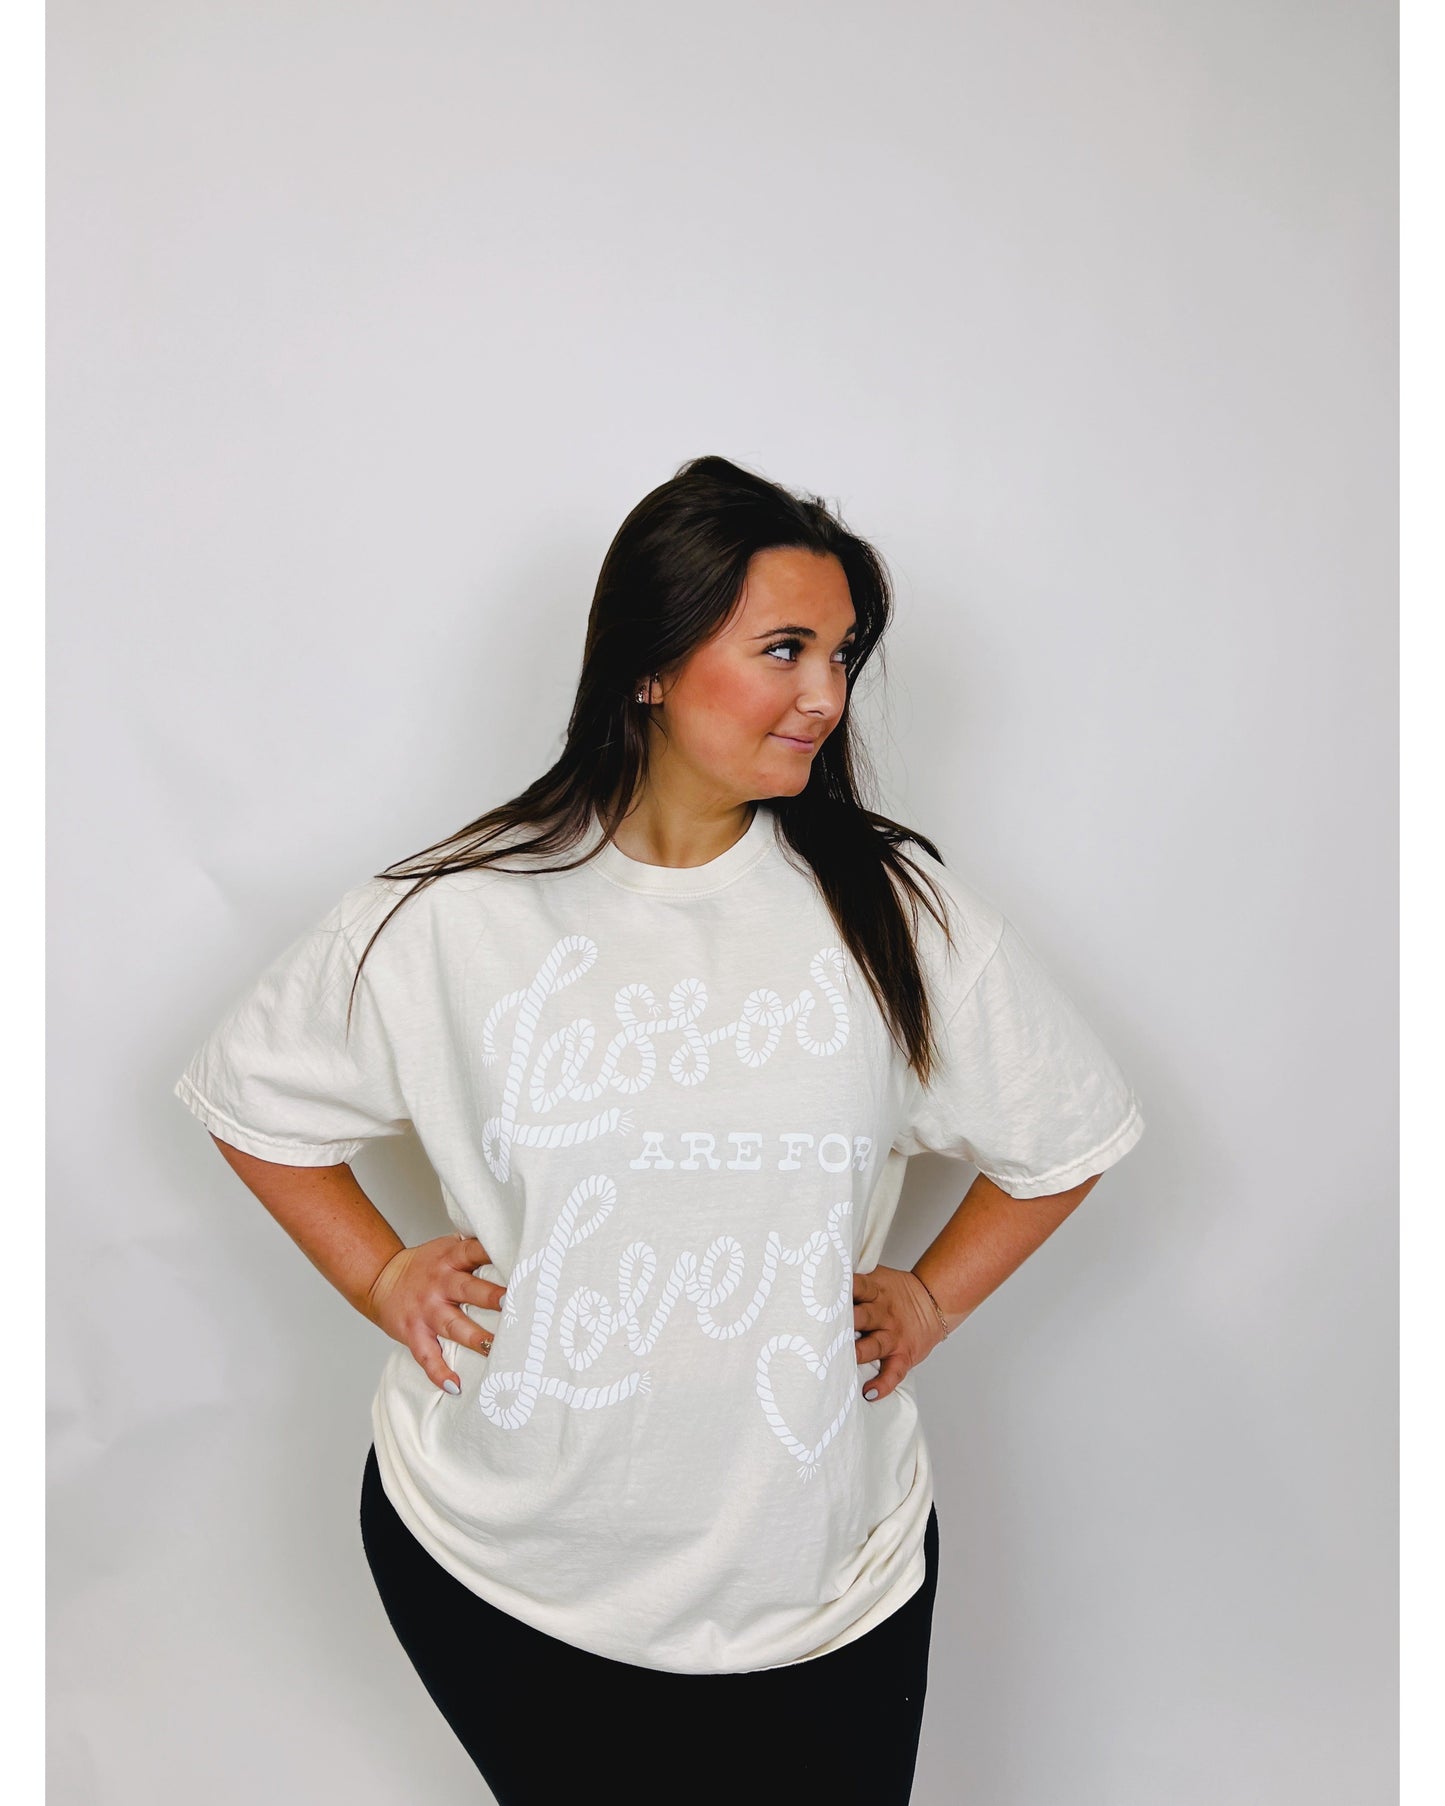 Lassos Are For Lovers Tee